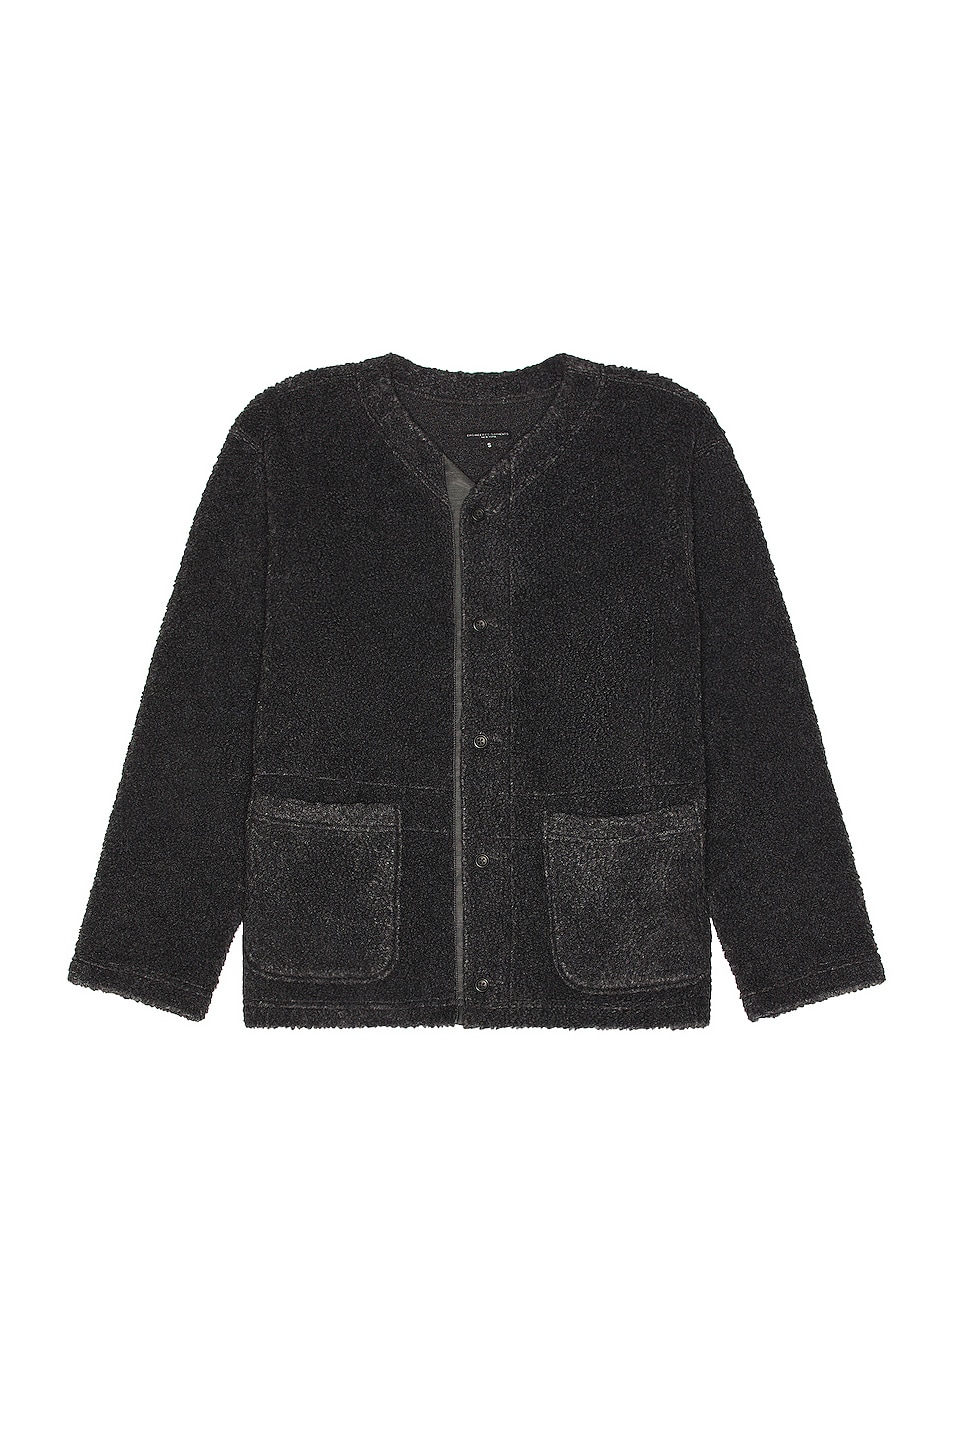 Image 1 of Engineered Garments Knit Cardigan in Charcoal